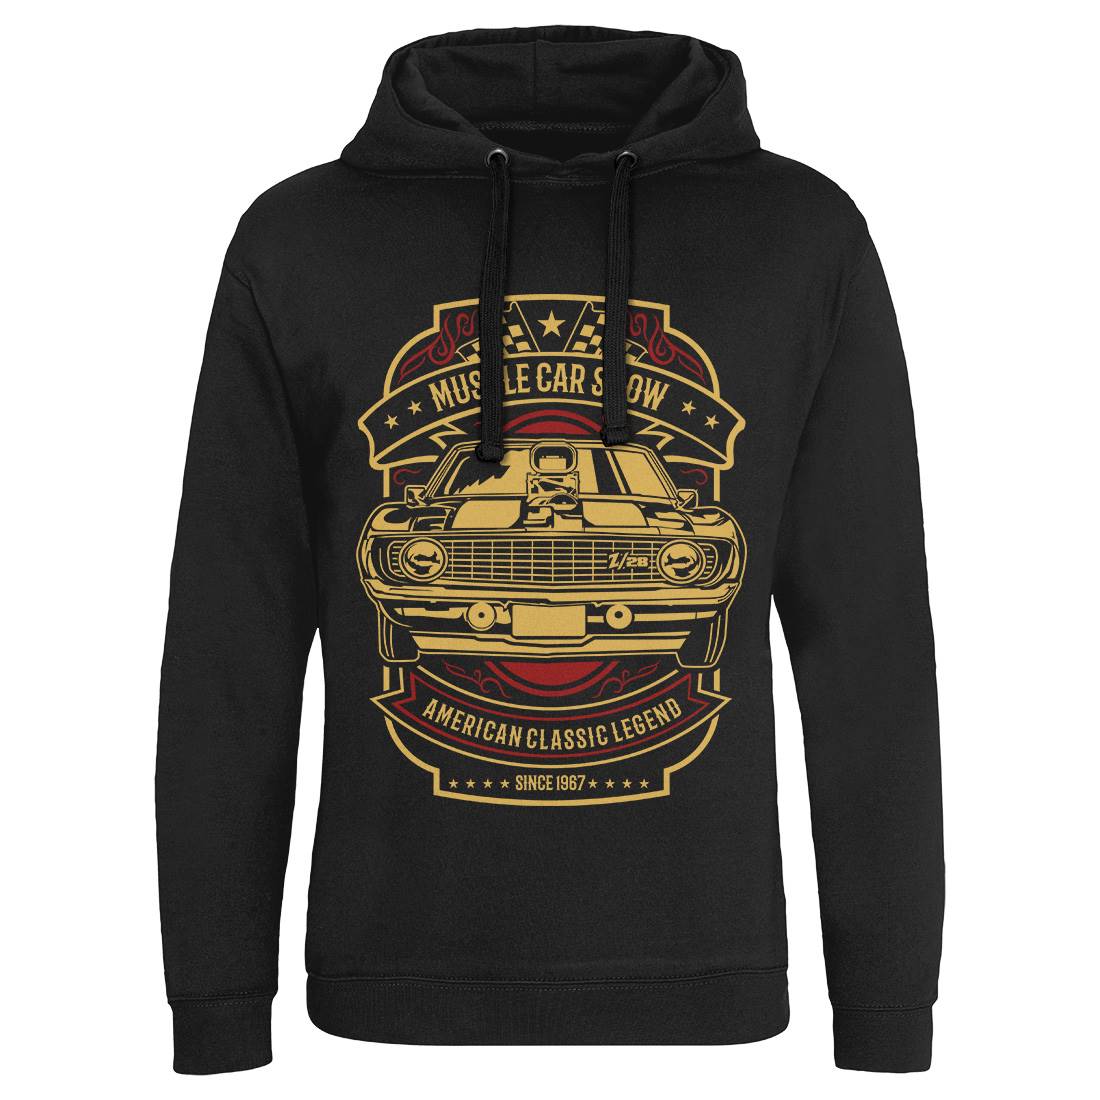 Muscle Car Show Mens Hoodie Without Pocket Cars B233